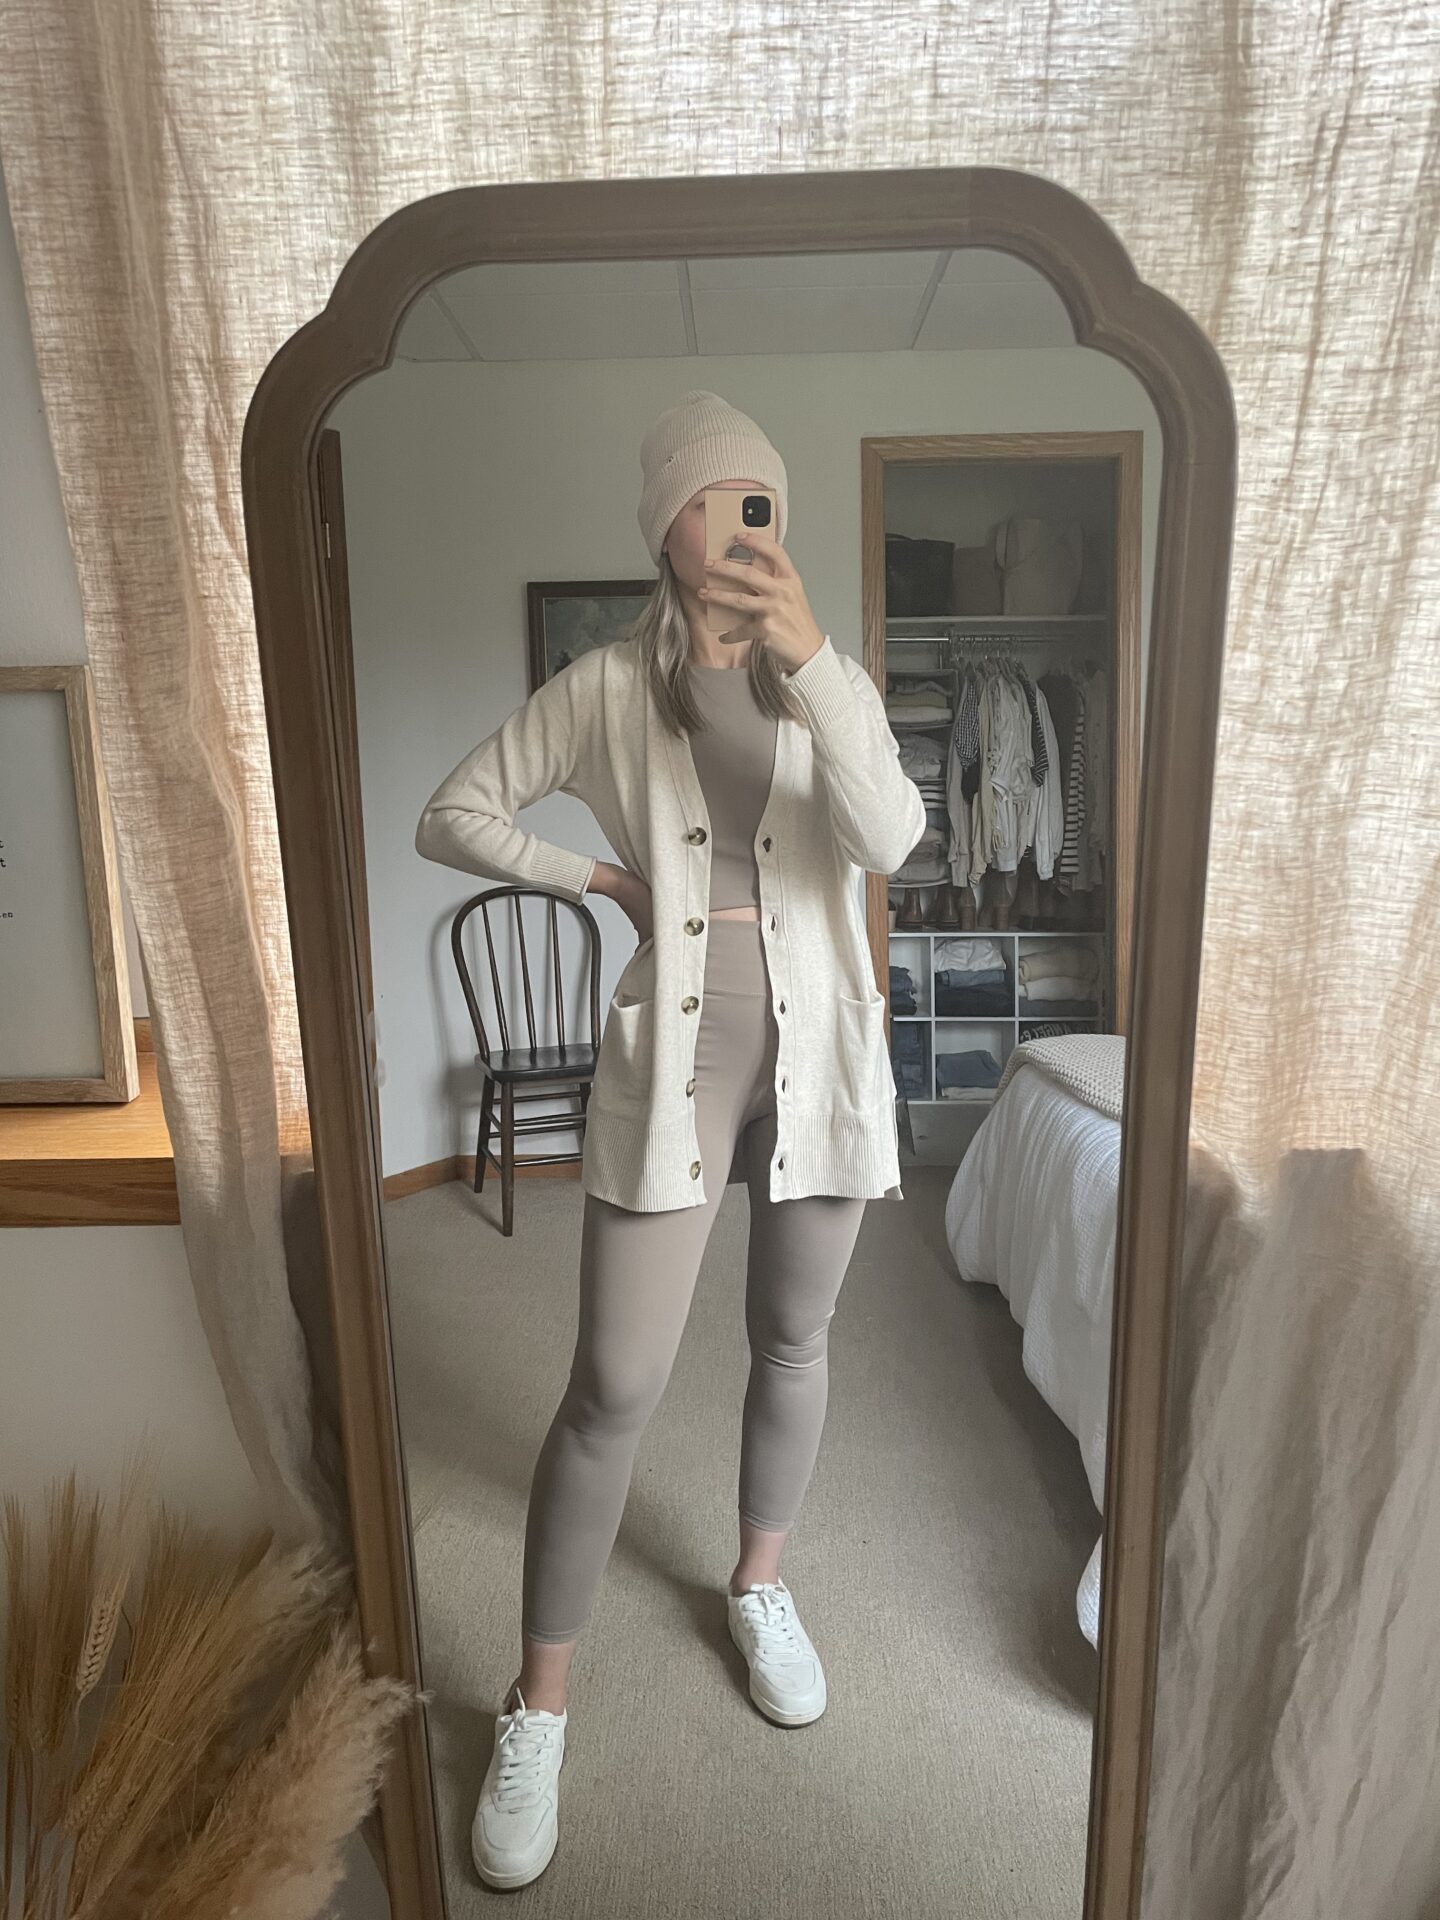 Karin Emily wears a madewell workout set, cream colored cardigan, and white leather sneakers